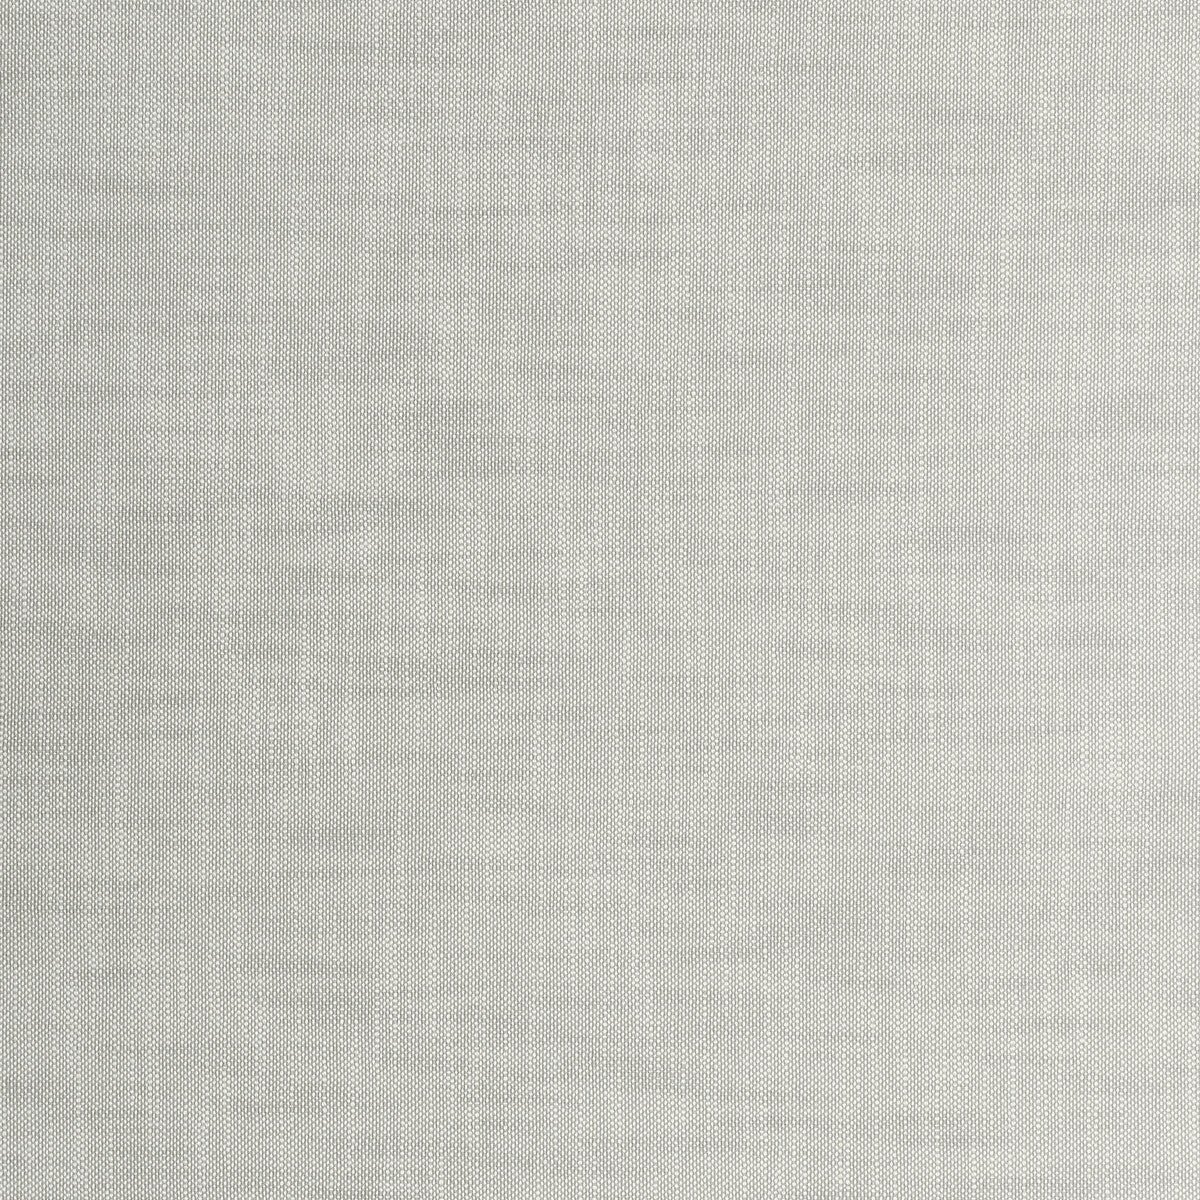 Kravet Smart fabric in 35517-11 color - pattern 35517.11.0 - by Kravet Smart in the Inside Out Performance Fabrics collection